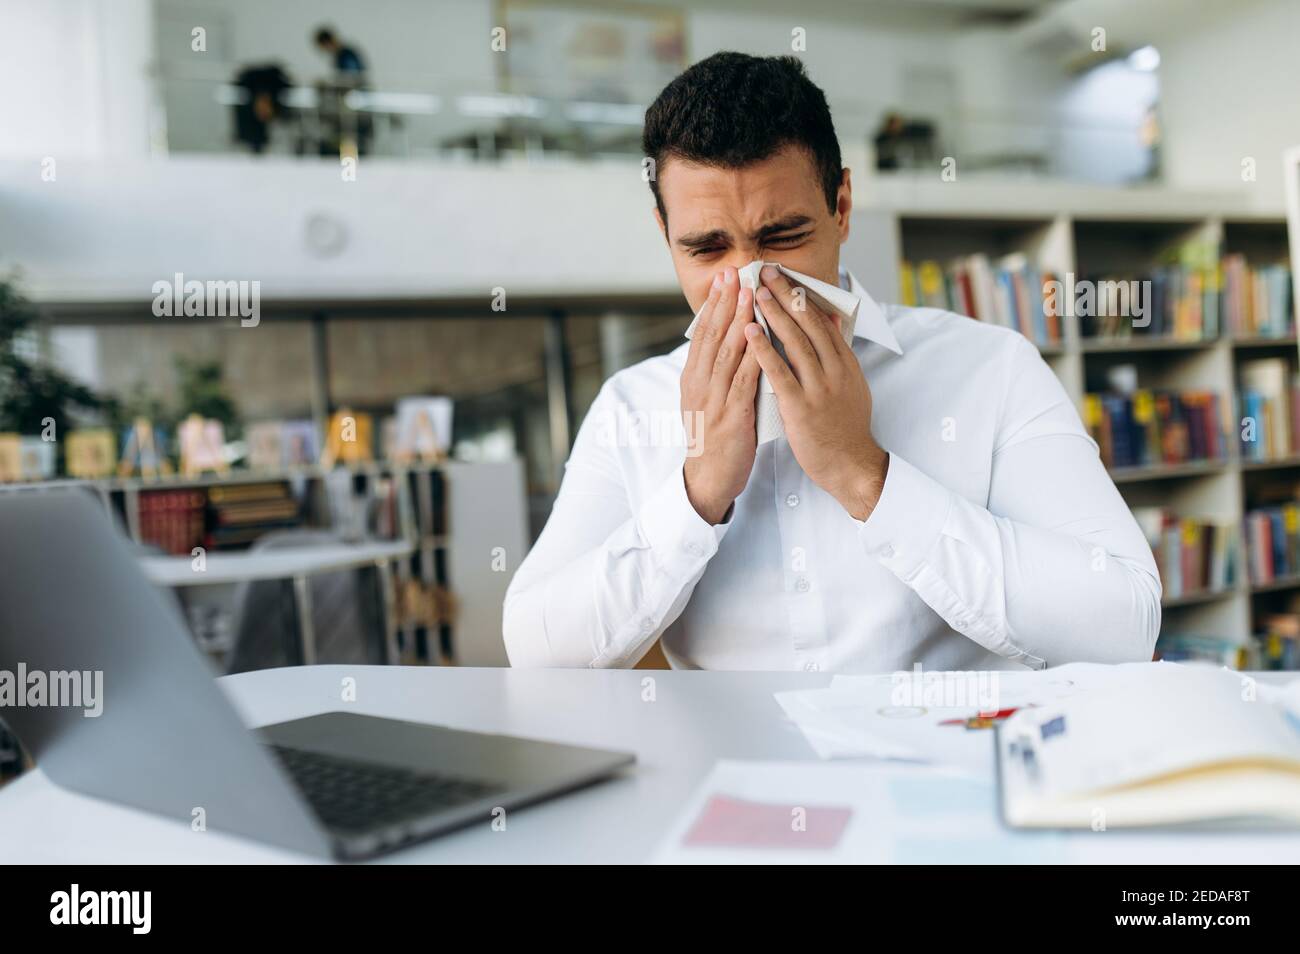 Unhealthy male employee sit at the desk, using a paper tissue, sneezing. Business man feeling unwell, struggling with running nose. Hispanic guy remotely working or studying, while sickness Stock Photo